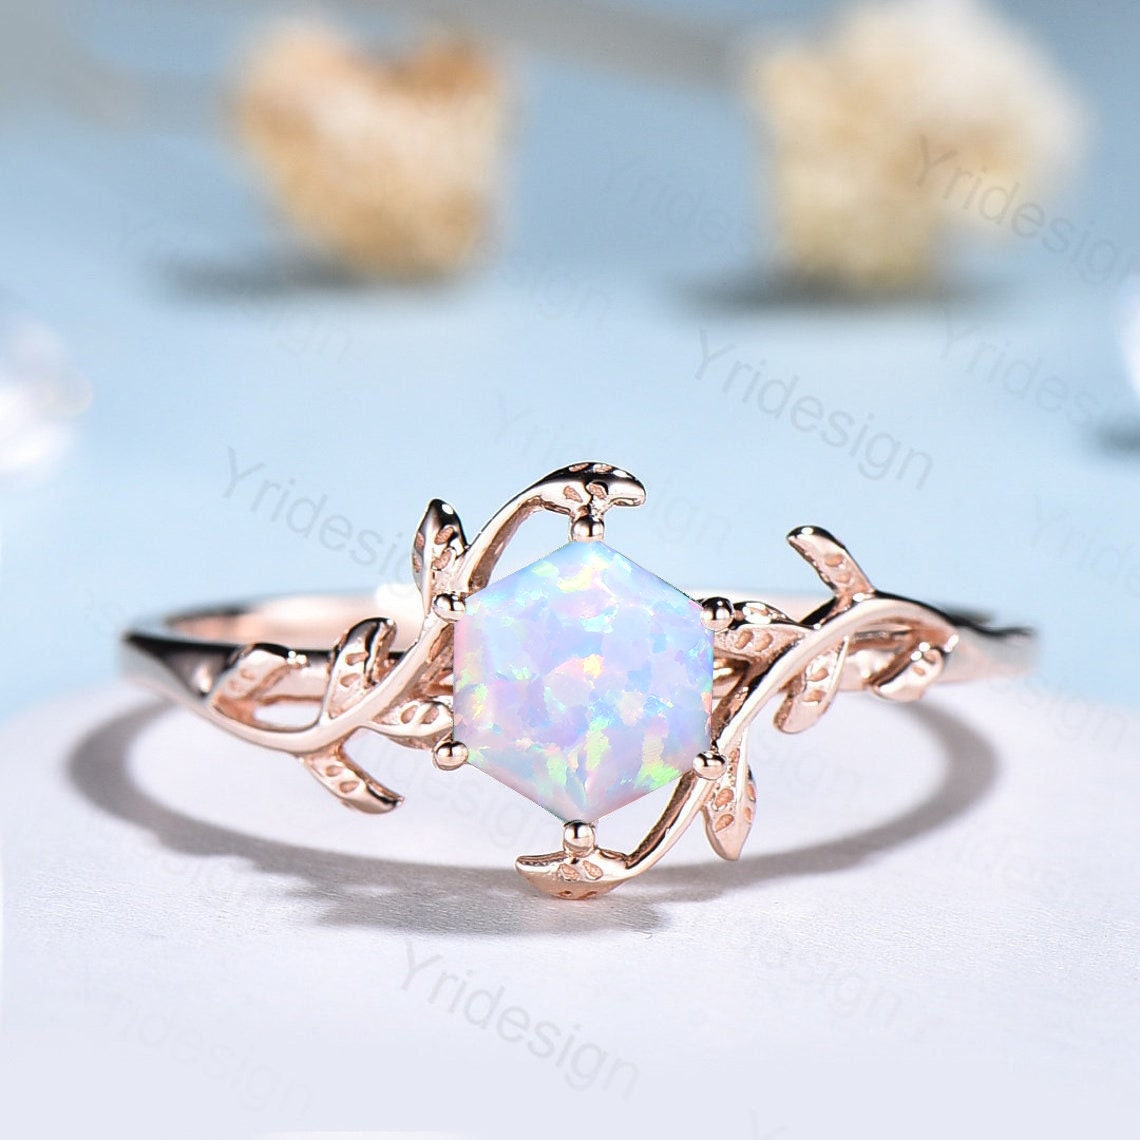 Vintage Opal Ring for women Hexagon Cut Opal Engagement Ring Unique Nature Inspired Bridal Ring Leaf Flower Antique Wedding Anniversary Gift - PENFINE